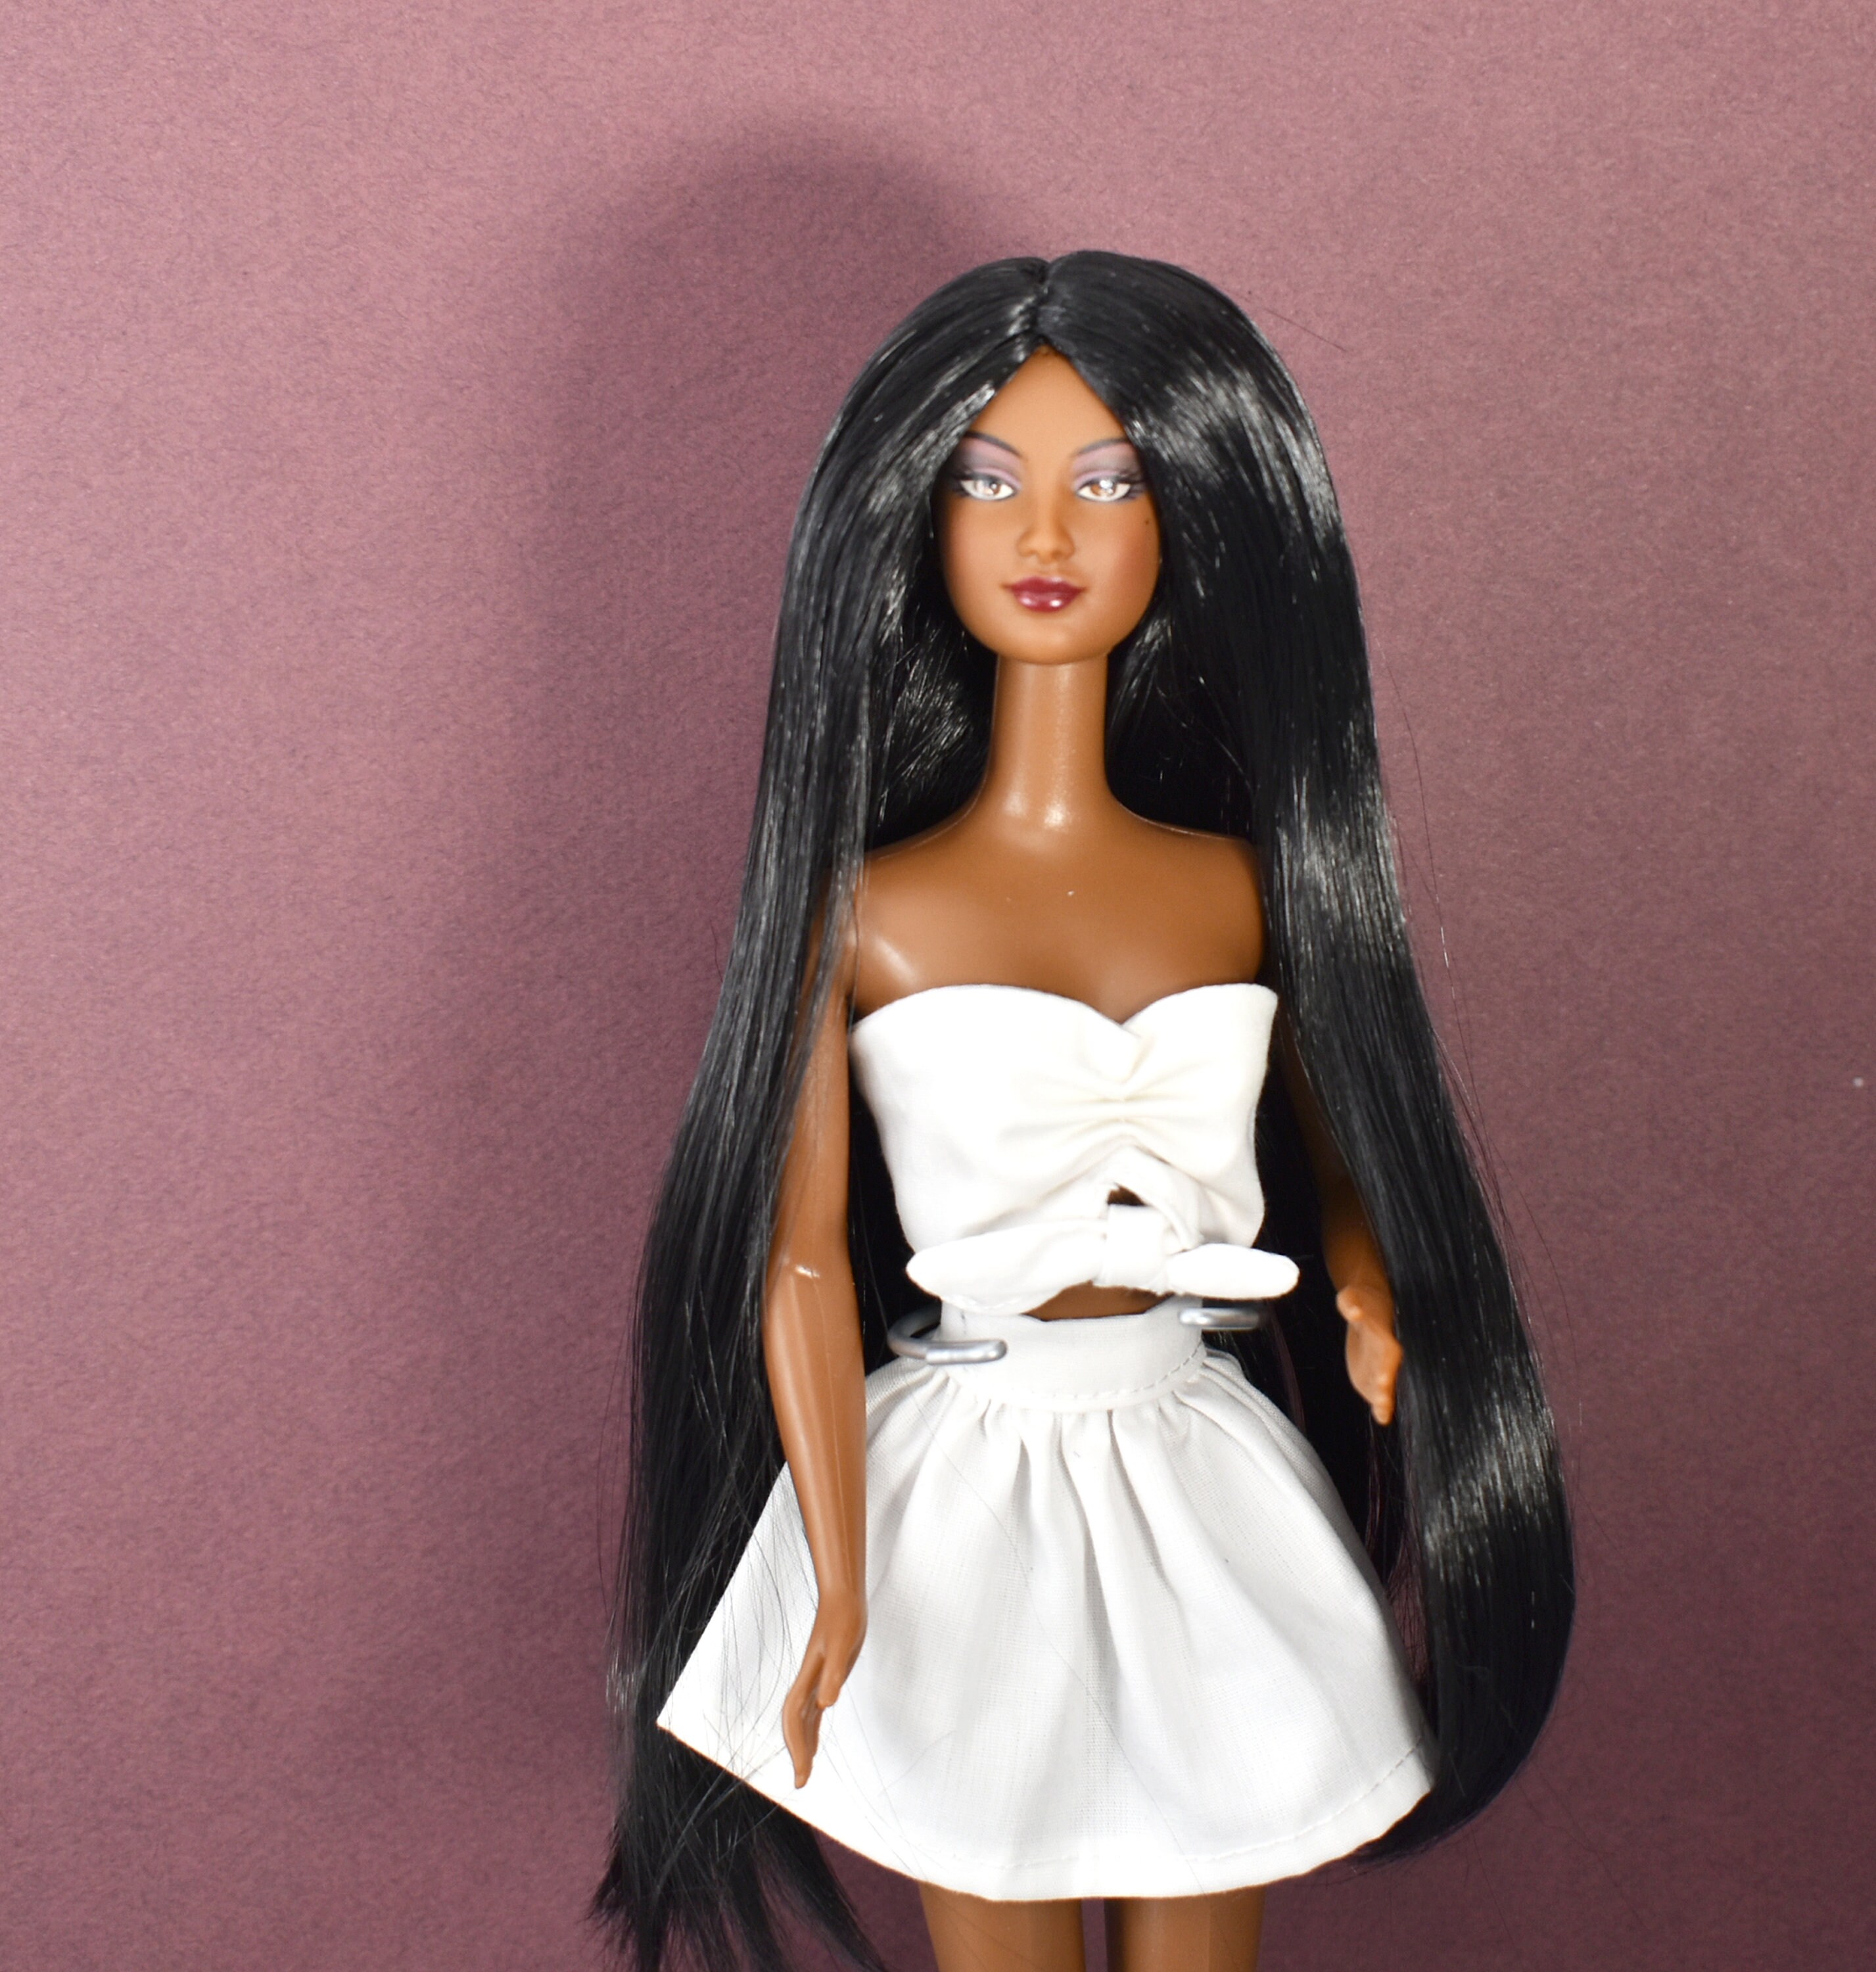 Barbie Career of The Year Judge Doll  Black Hair Kid Toy Gift for sale  online  eBay